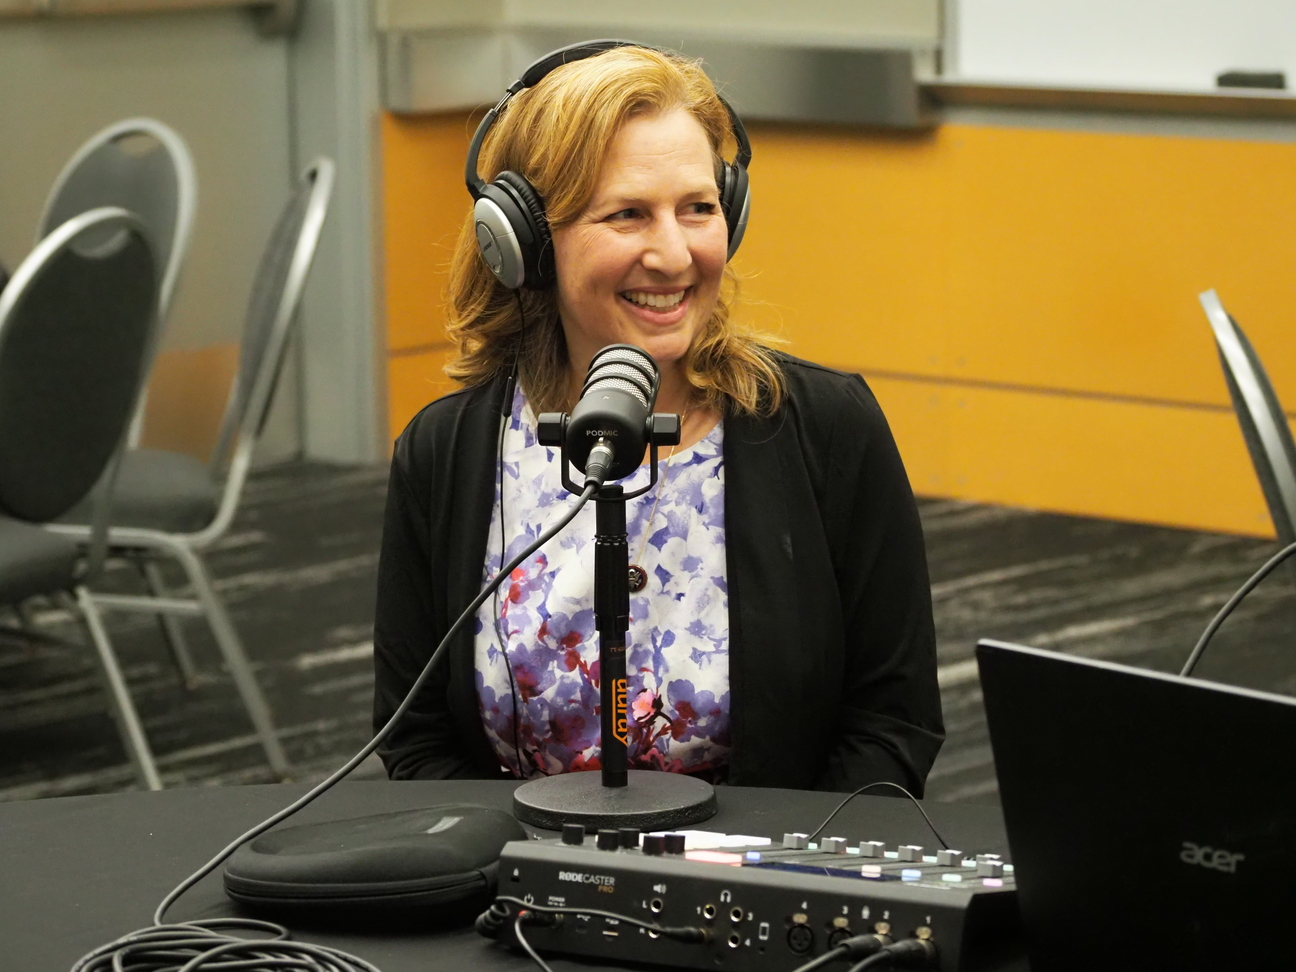 Kim Schrier participates in NPI's Convention Conversations limited podcast series